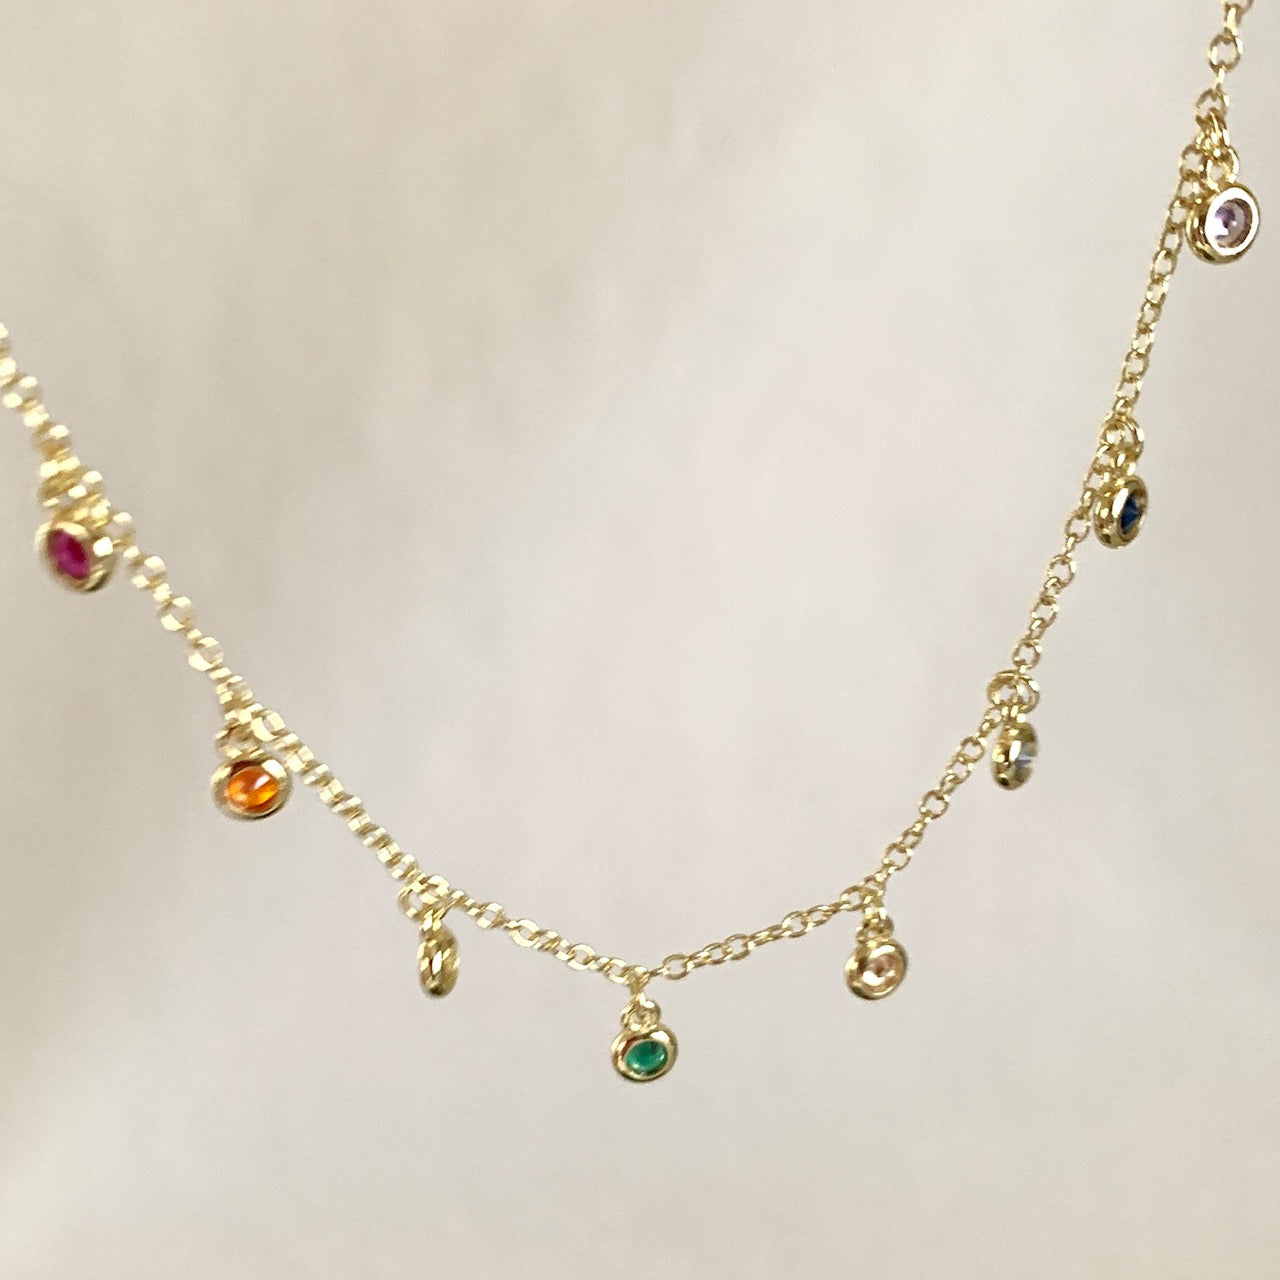 Celestial Planets Necklace, Sterling Silver with 18K Gold Plating